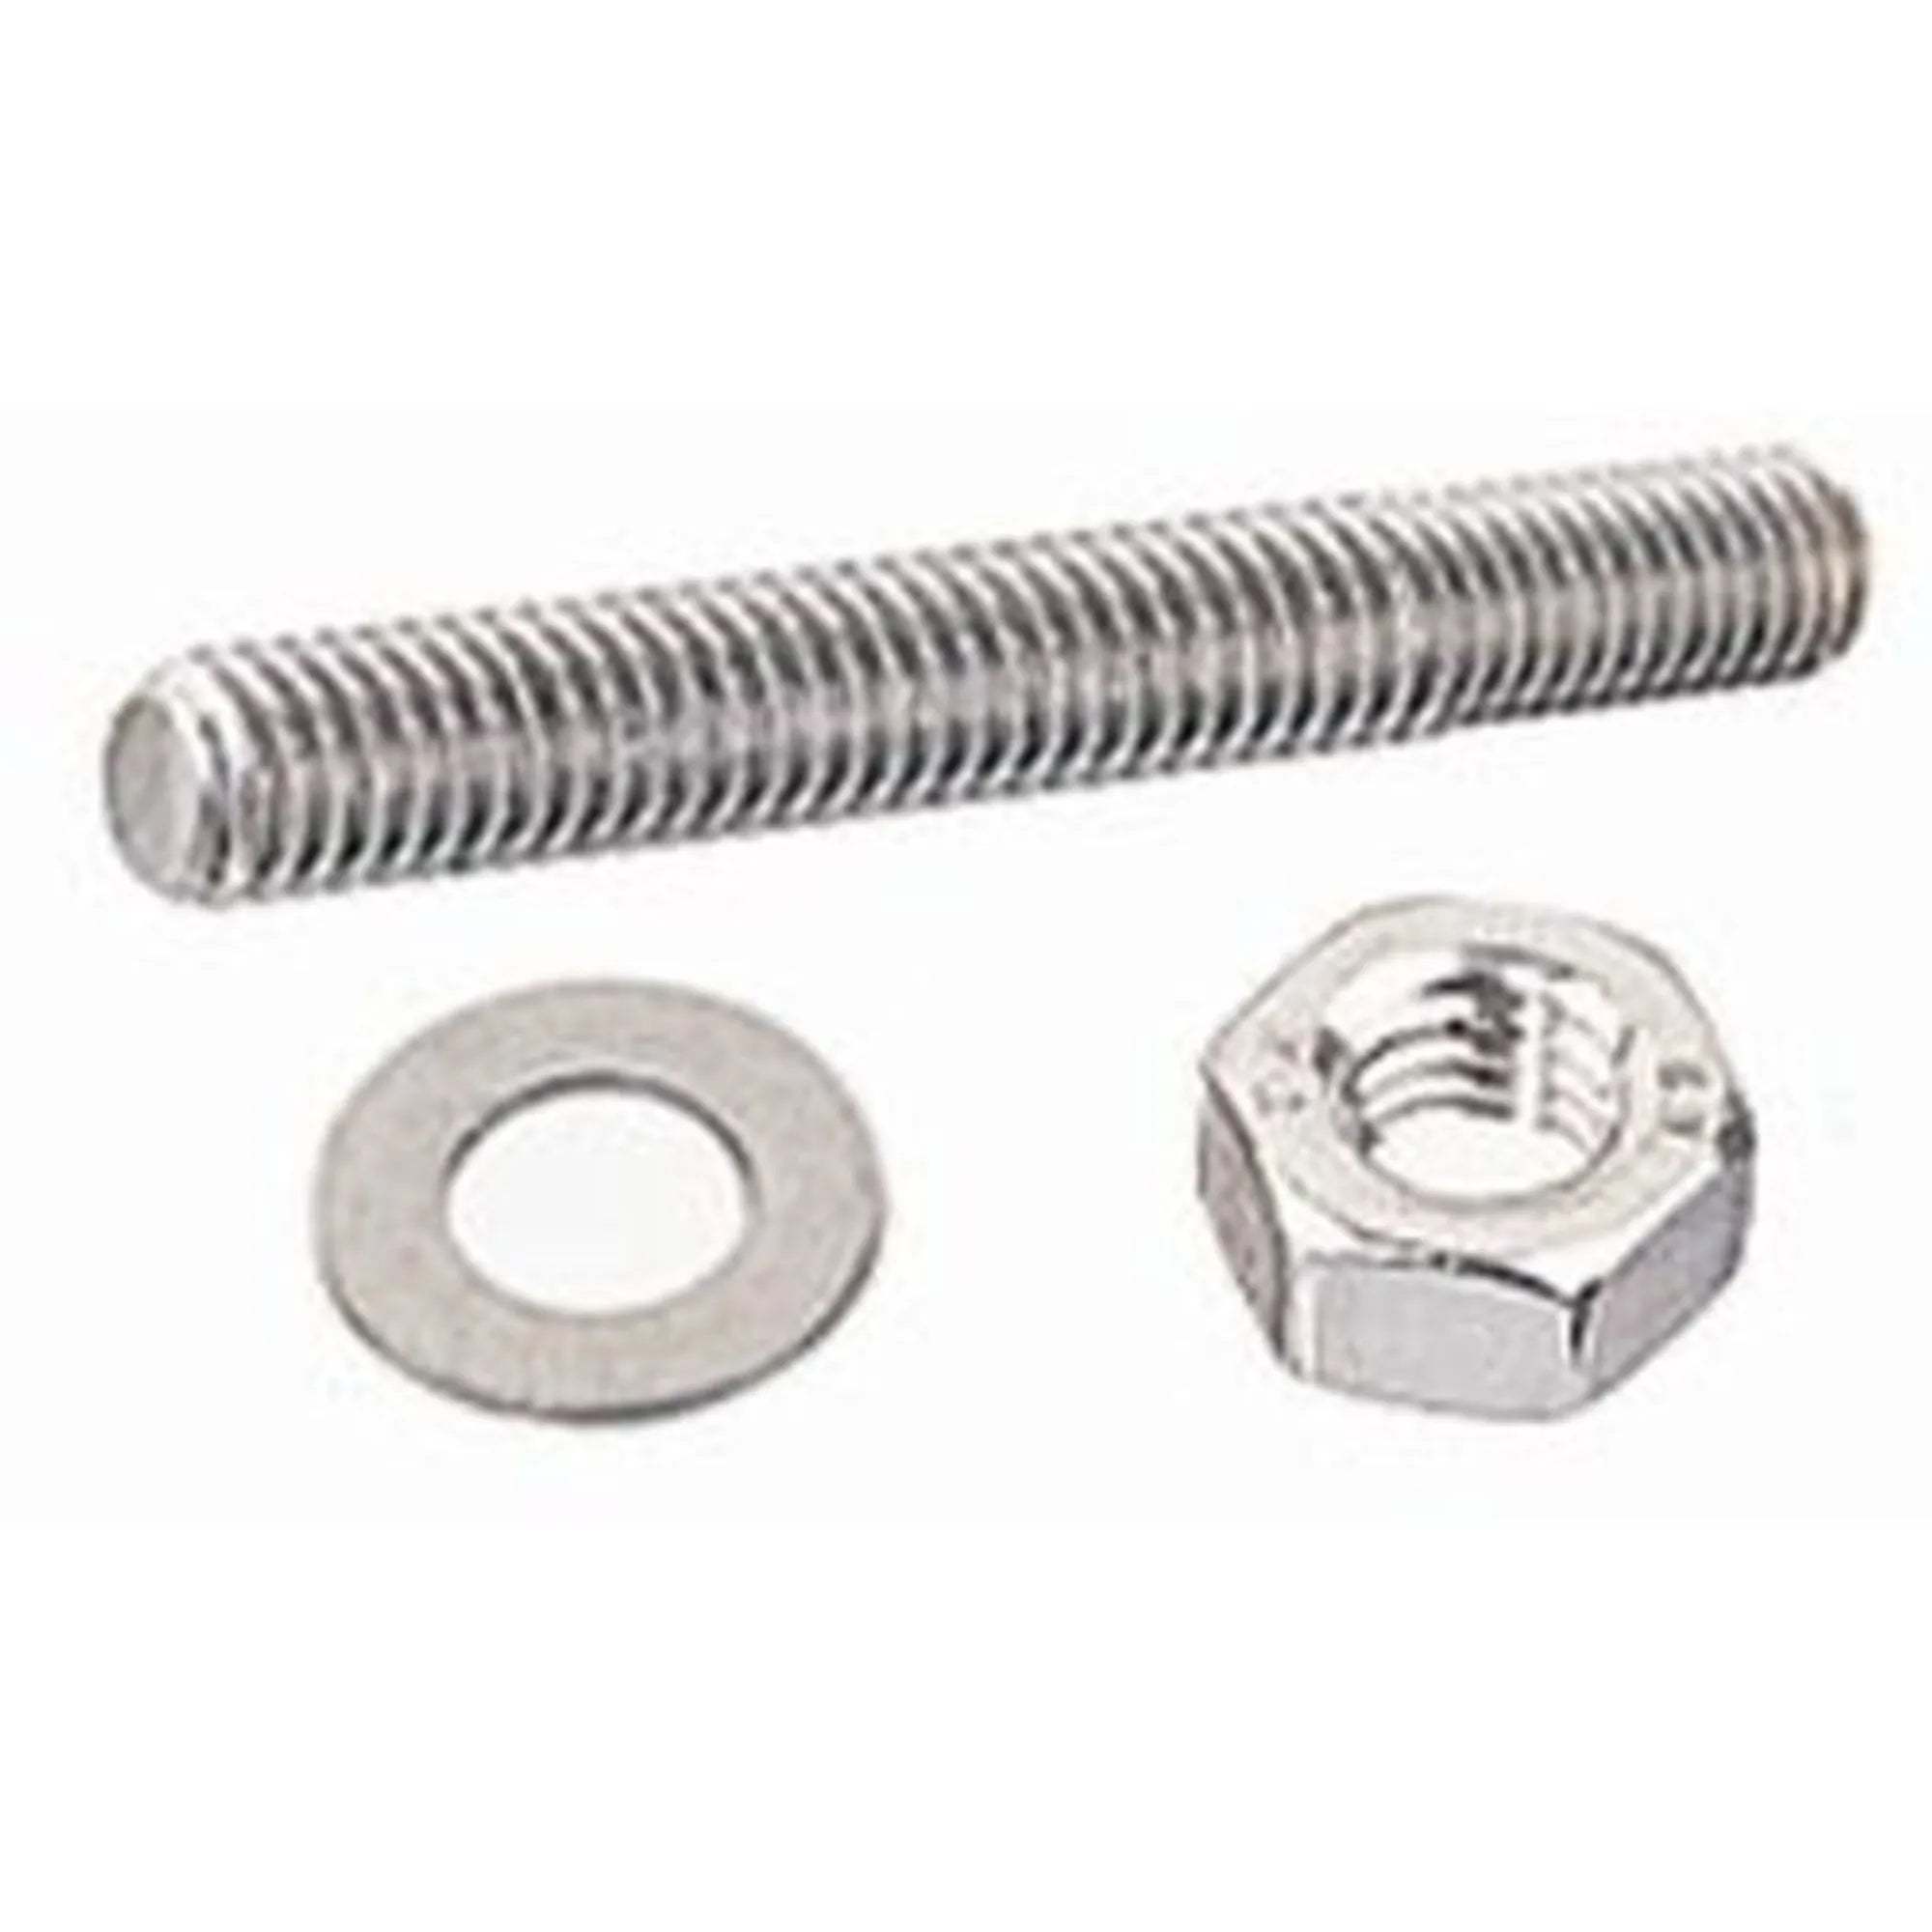 A4 S/S Studding Inc. Nuts & Washers